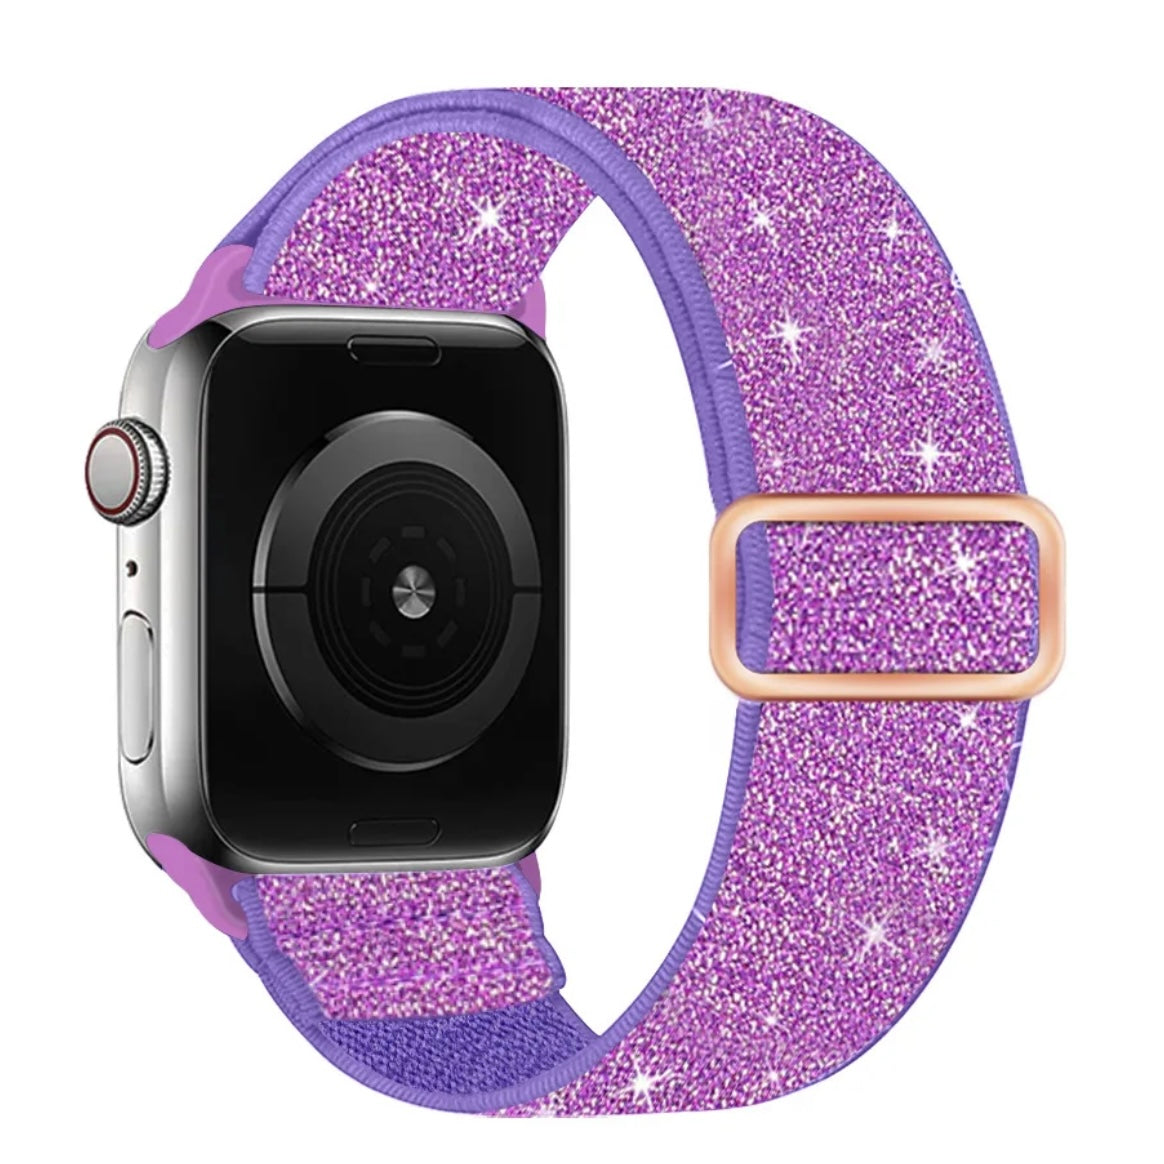 GlimmerGlitz Stretchy Nylon Elastic Loop Band For Apple Watch Multiple Colors Available